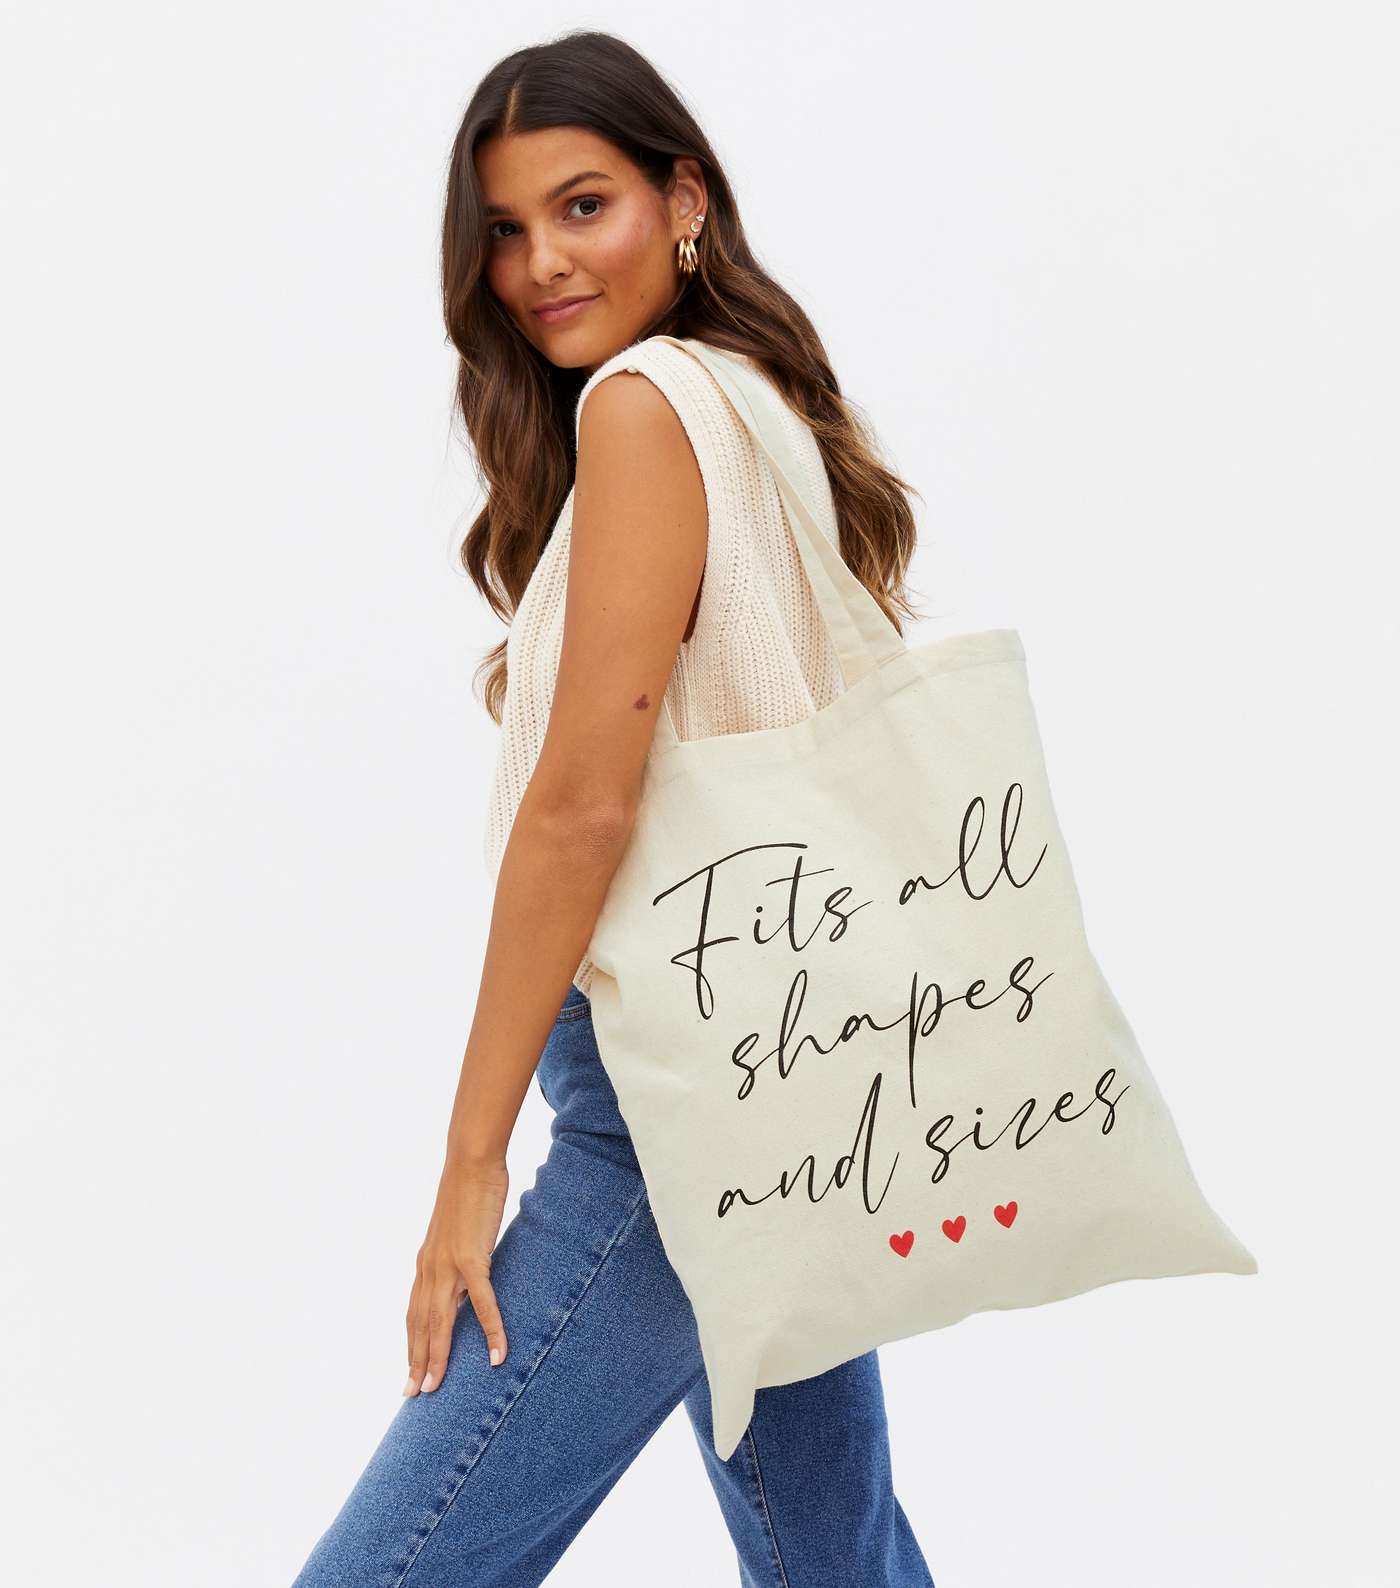 Cream Canvas Fits All Shapes and Sizes Tote Bag Image 2